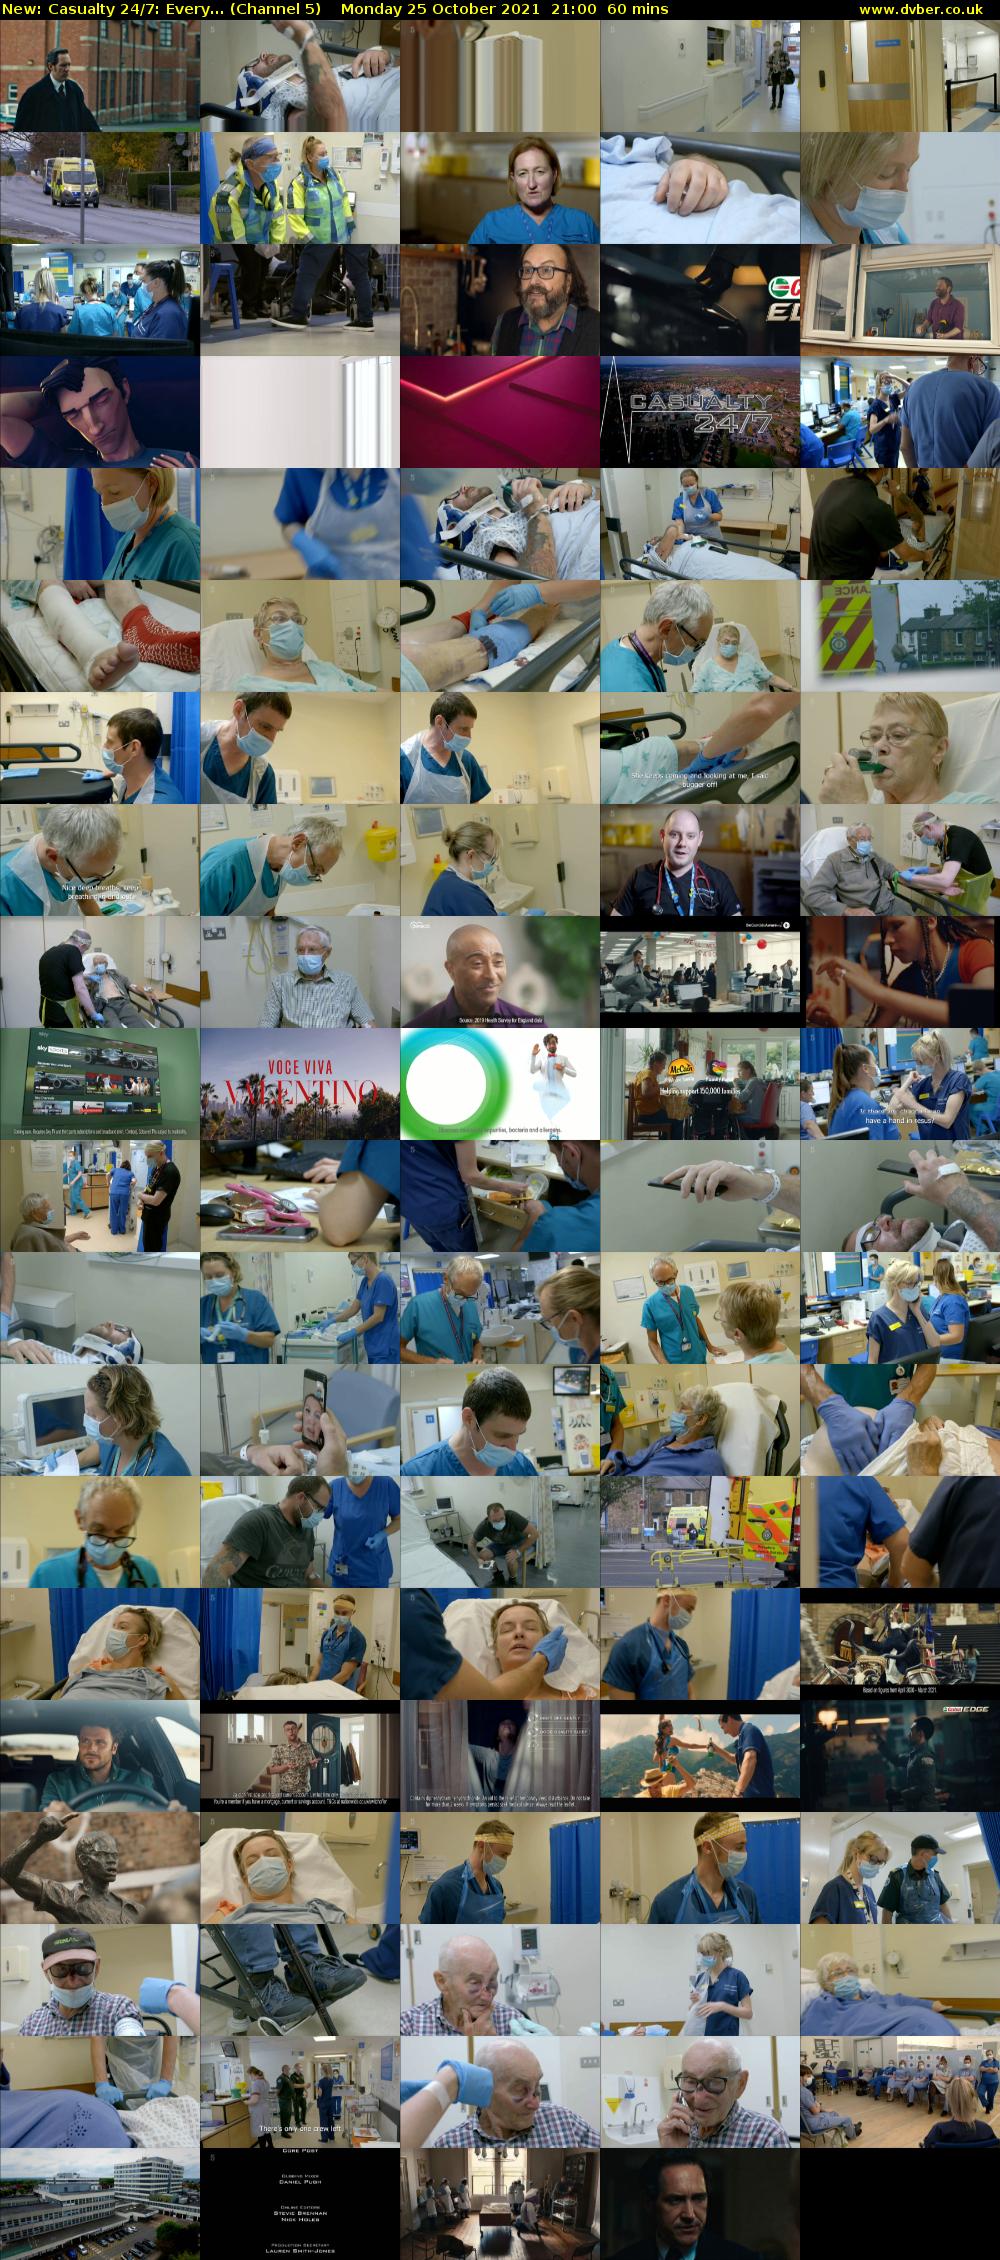 Casualty 24/7: Every... (Channel 5) Monday 25 October 2021 21:00 - 22:00